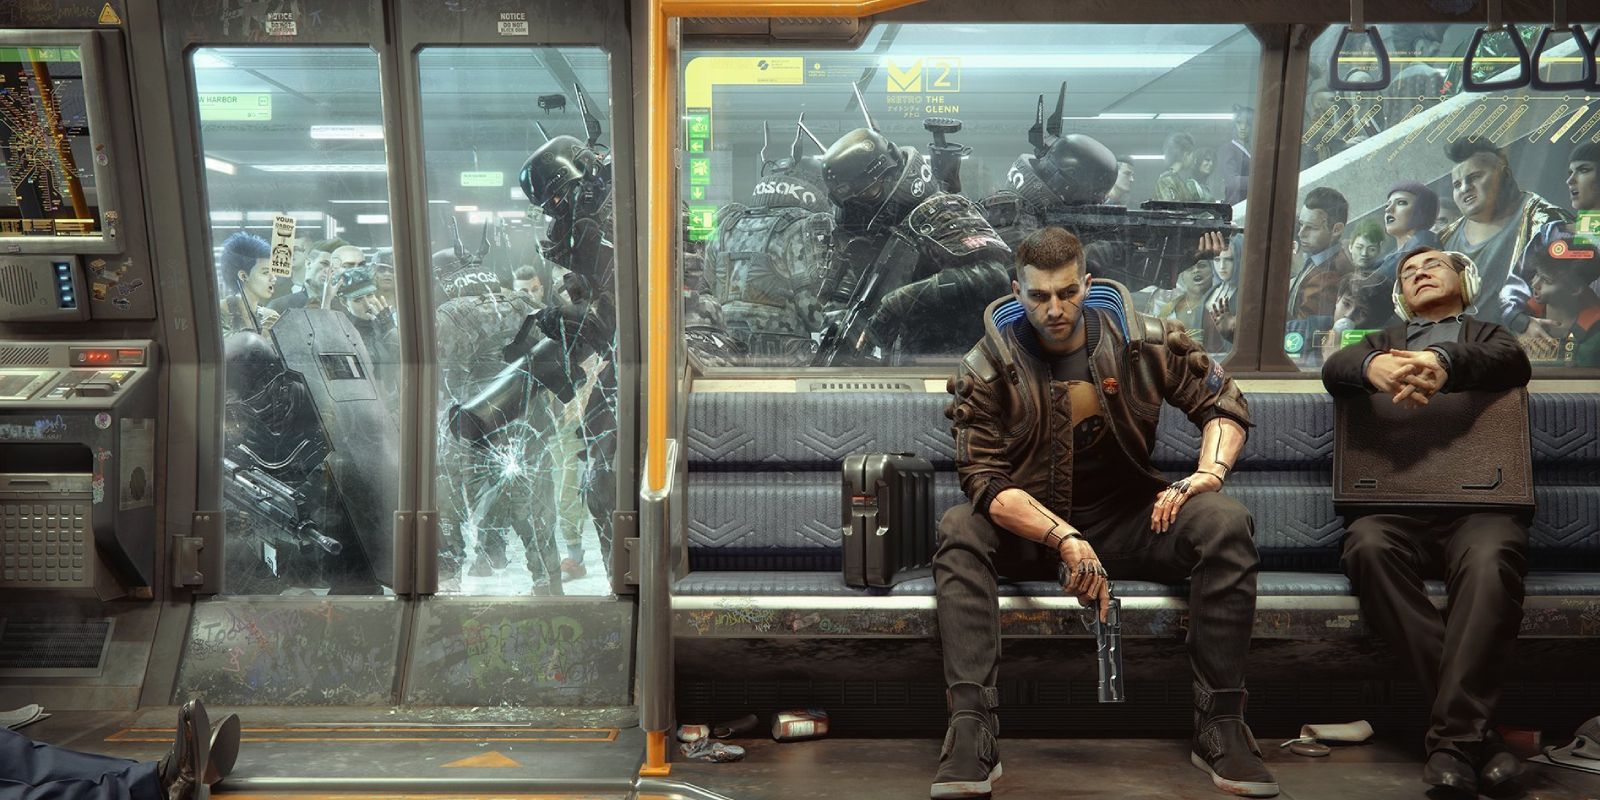 Everything Cyberpunk 2077 Gets Wrong About Subways, According To Experts Public Transportation